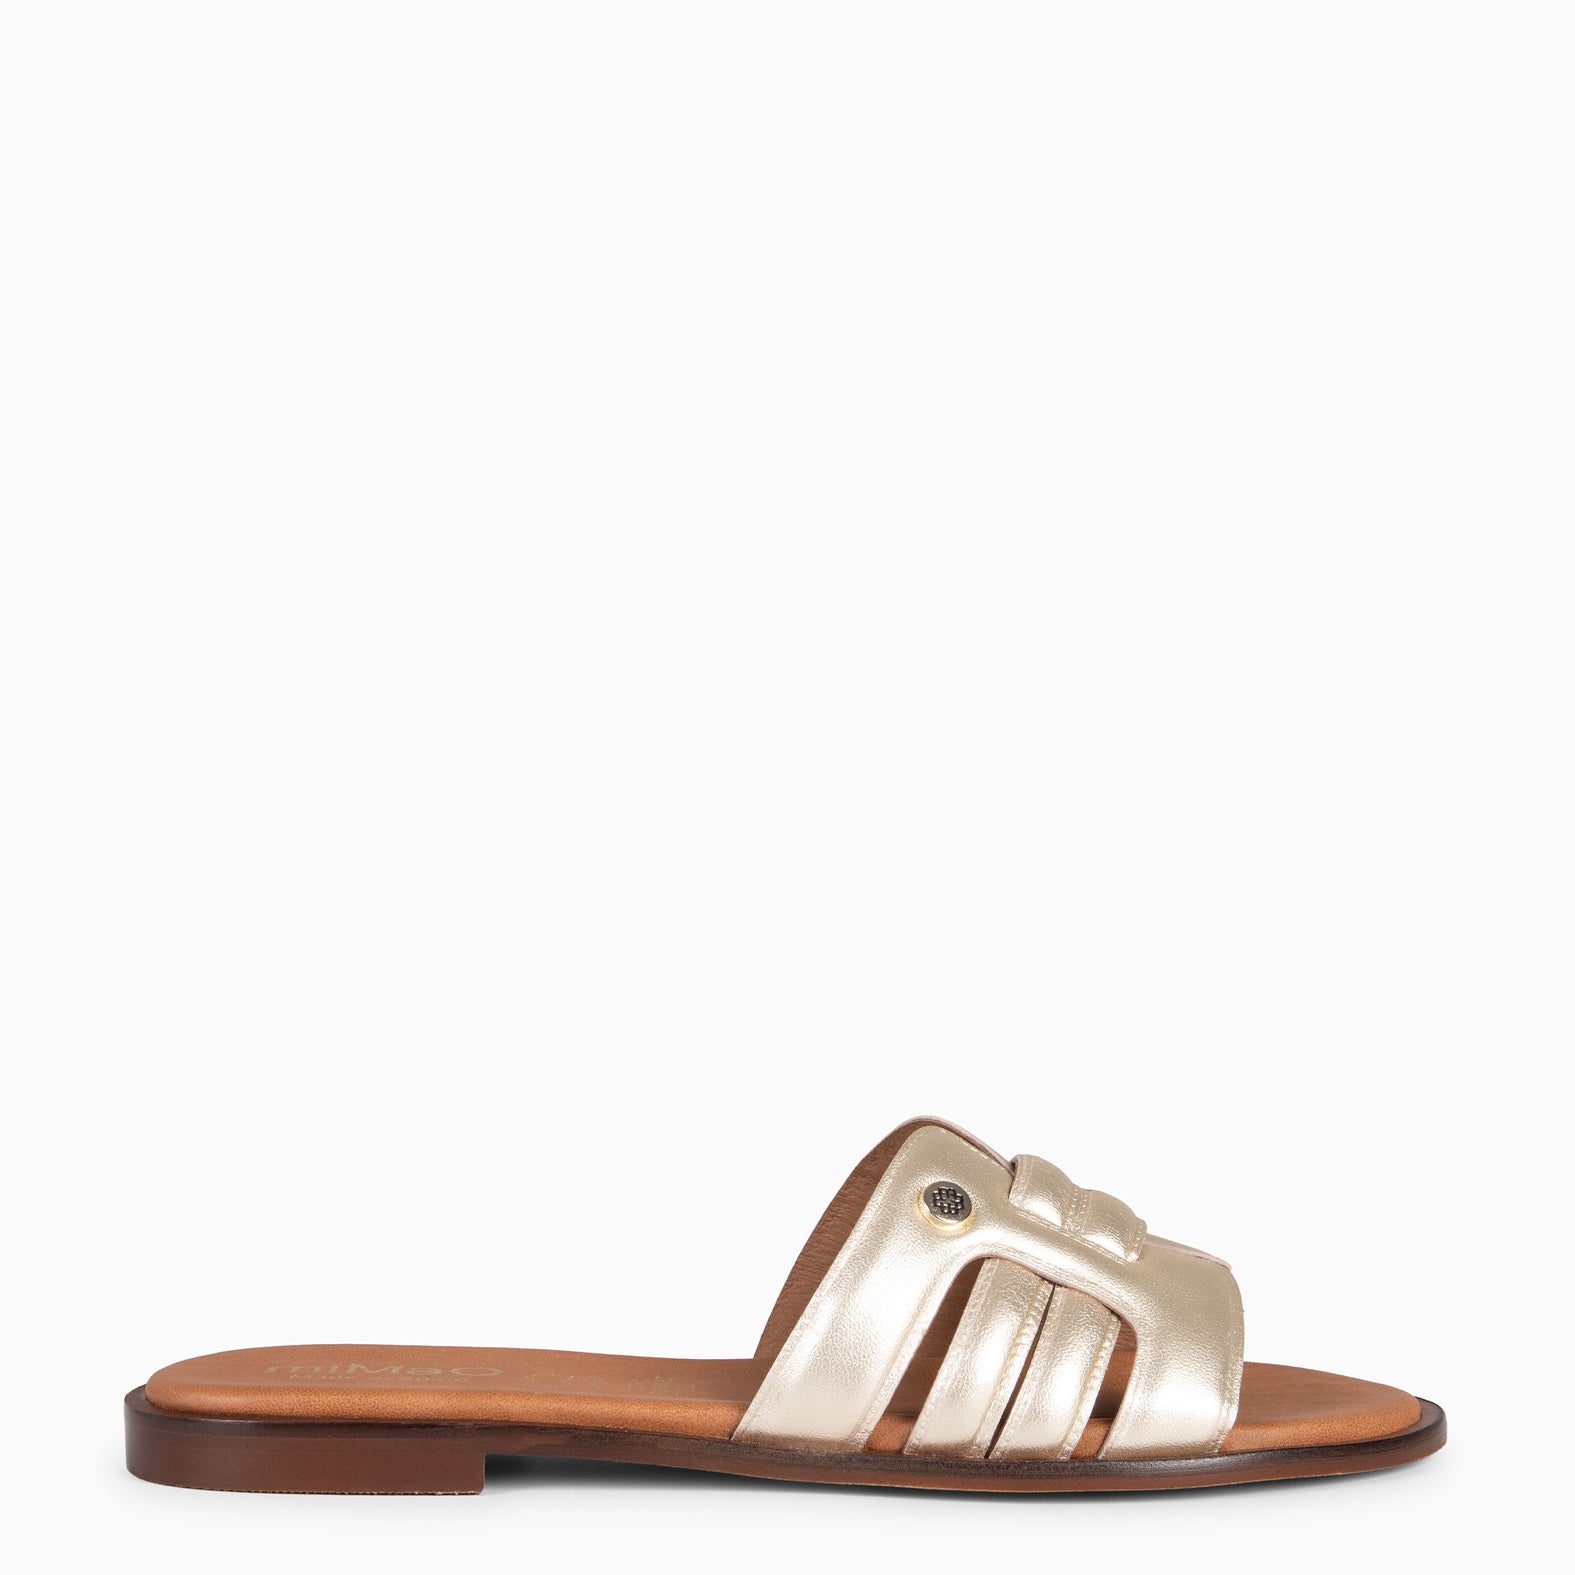 MENFIS – CHAMPAGNE Flat Sandals